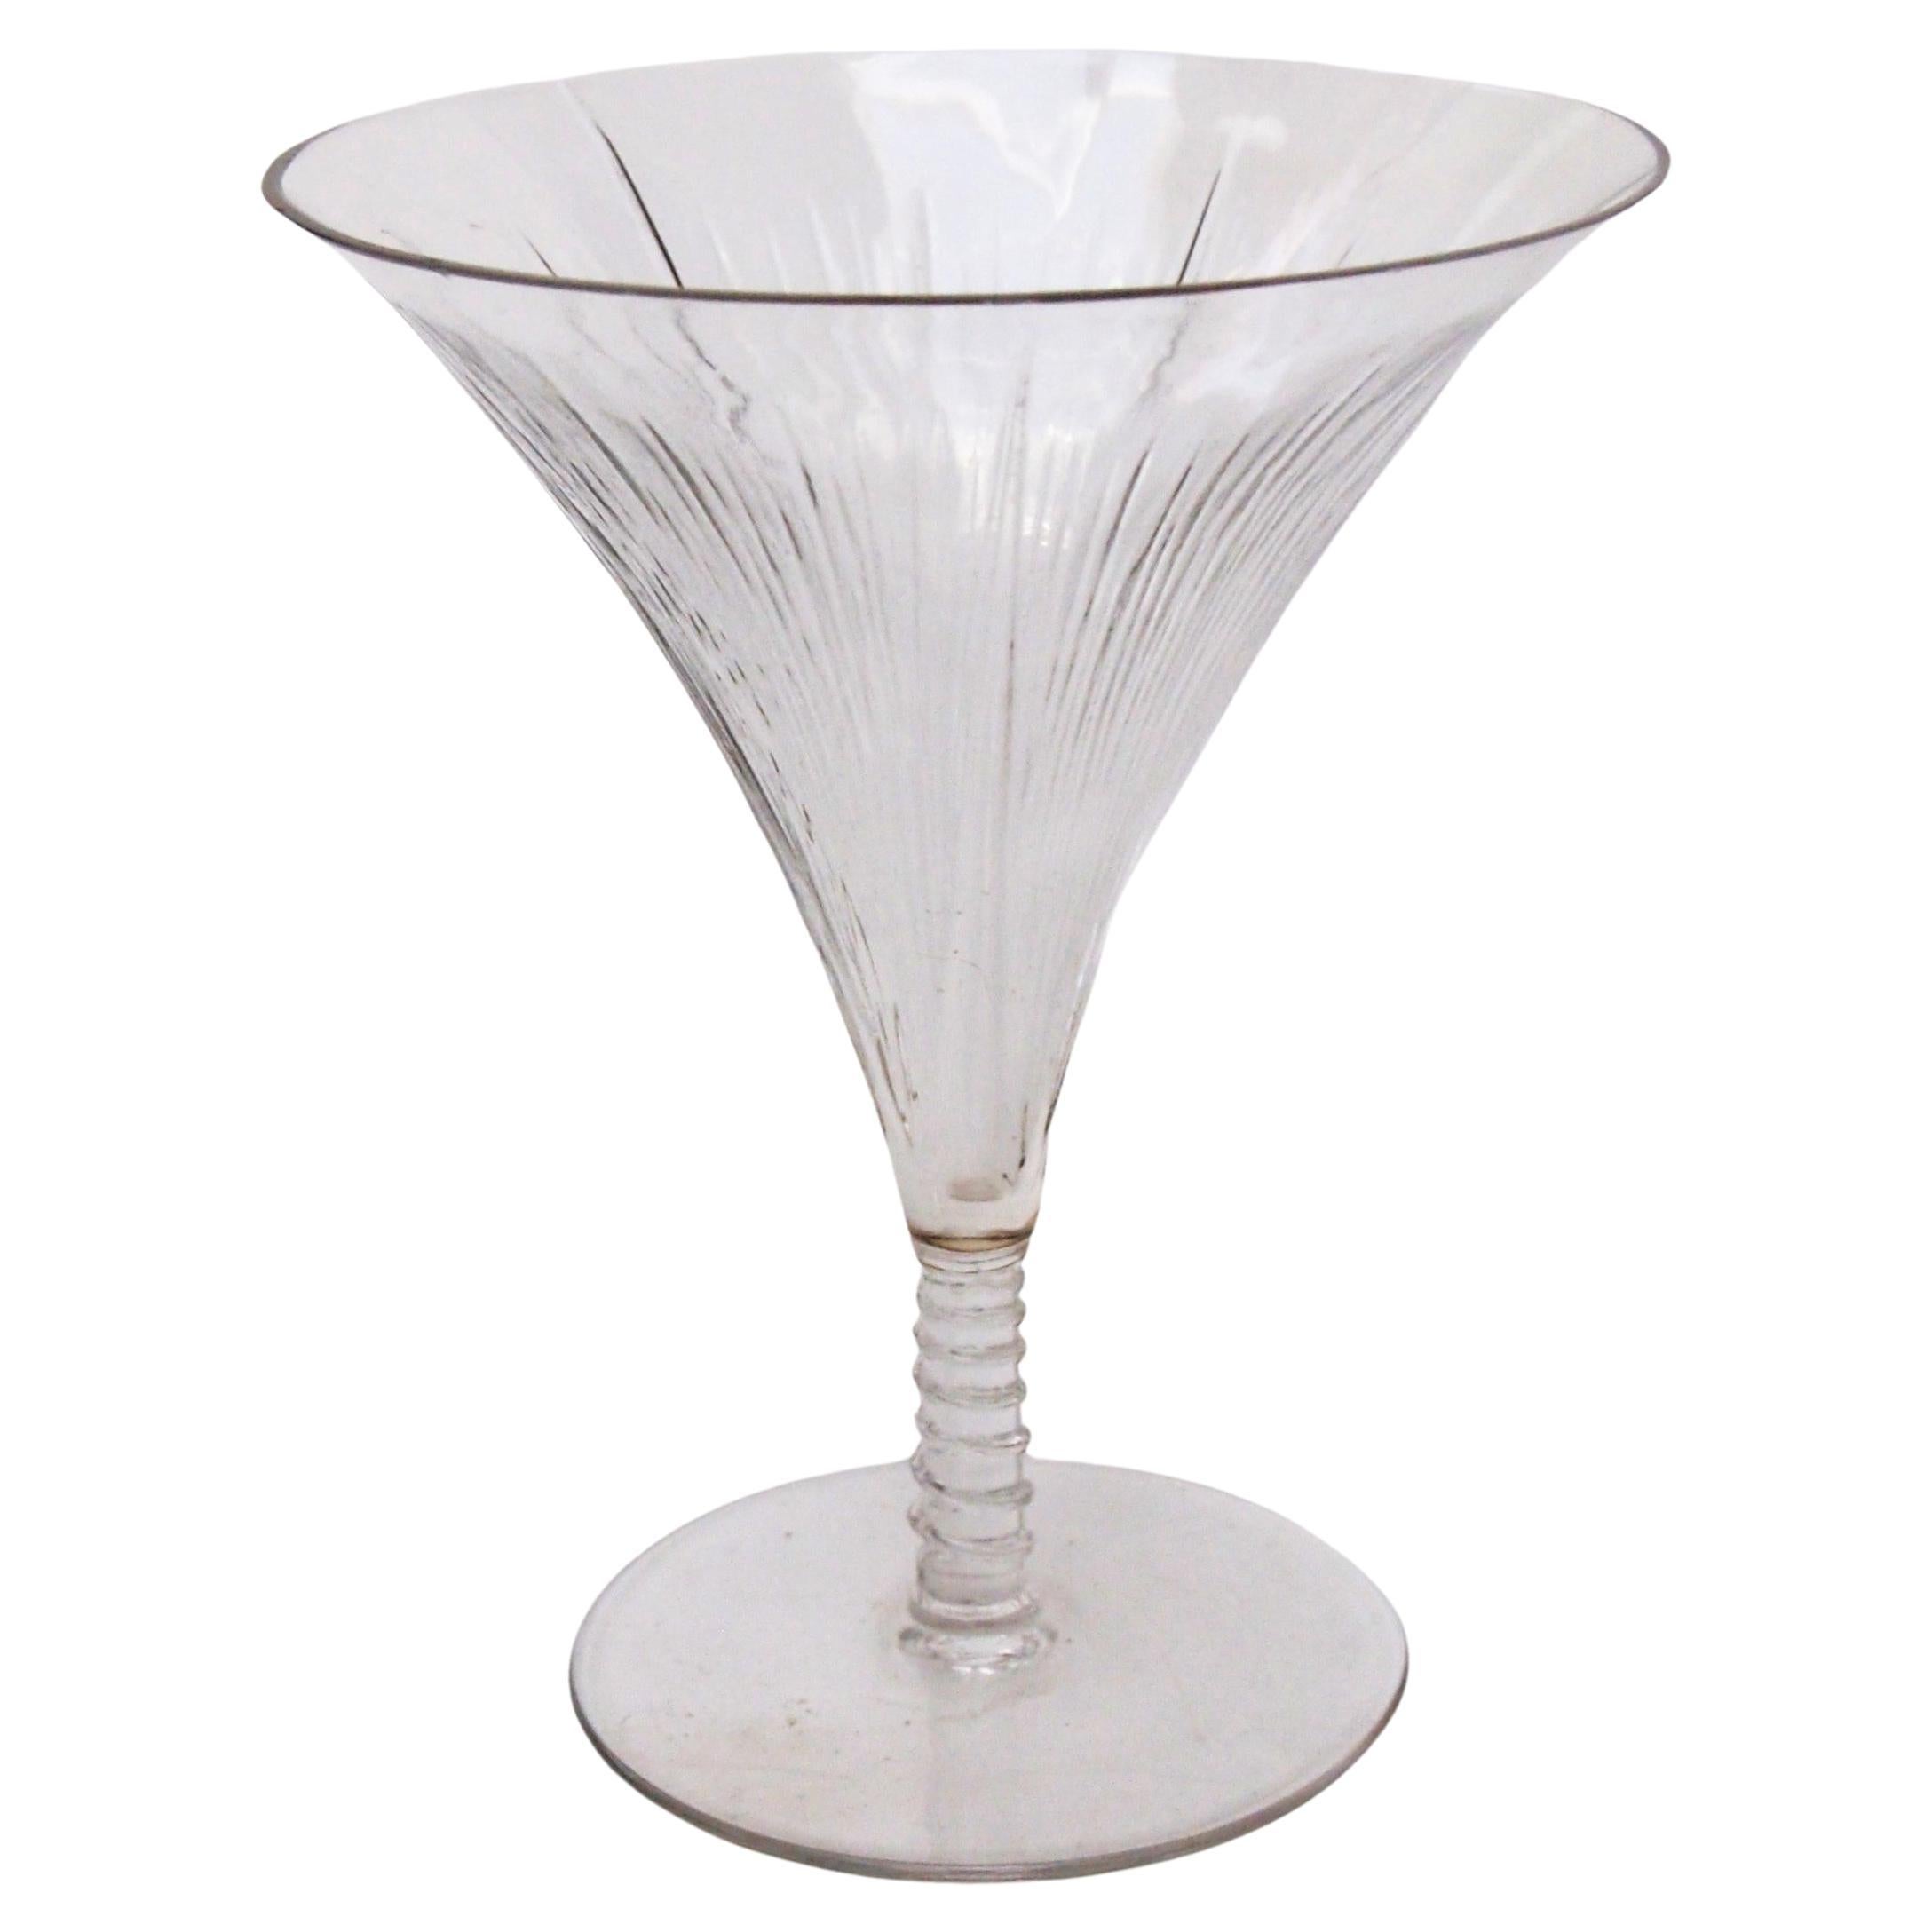 Exceptionally Rare Rene Lalique signed Liseron footed glass 1921 For Sale